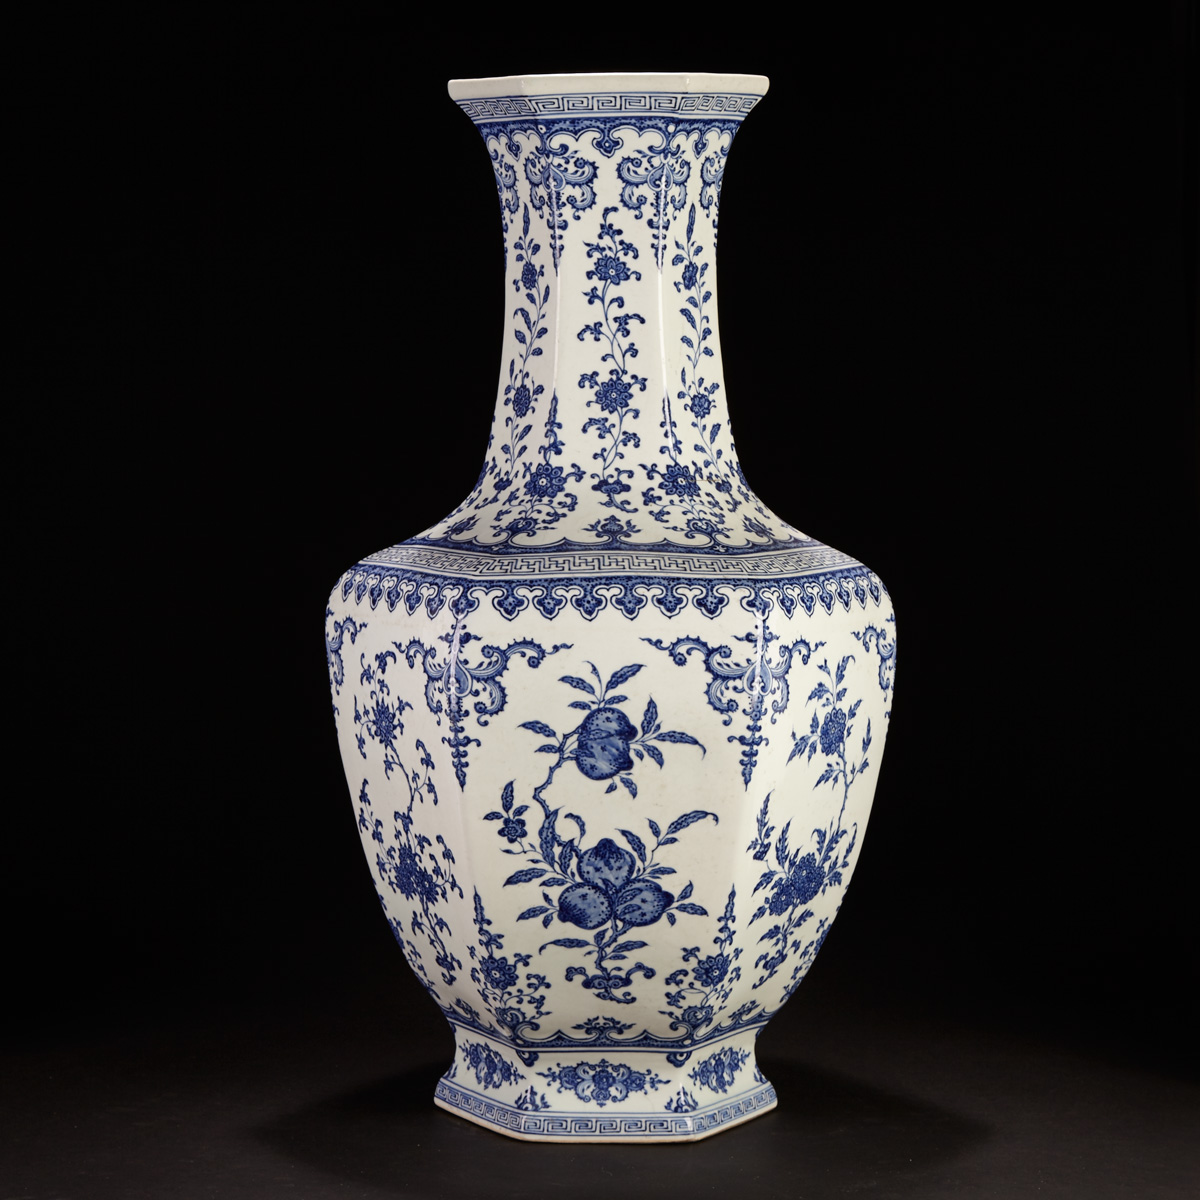 A Very Fine Imperial Style Blue and White Hexagonal Vase, Qianlong Six-Character Seal Mark, Late 19th Century


